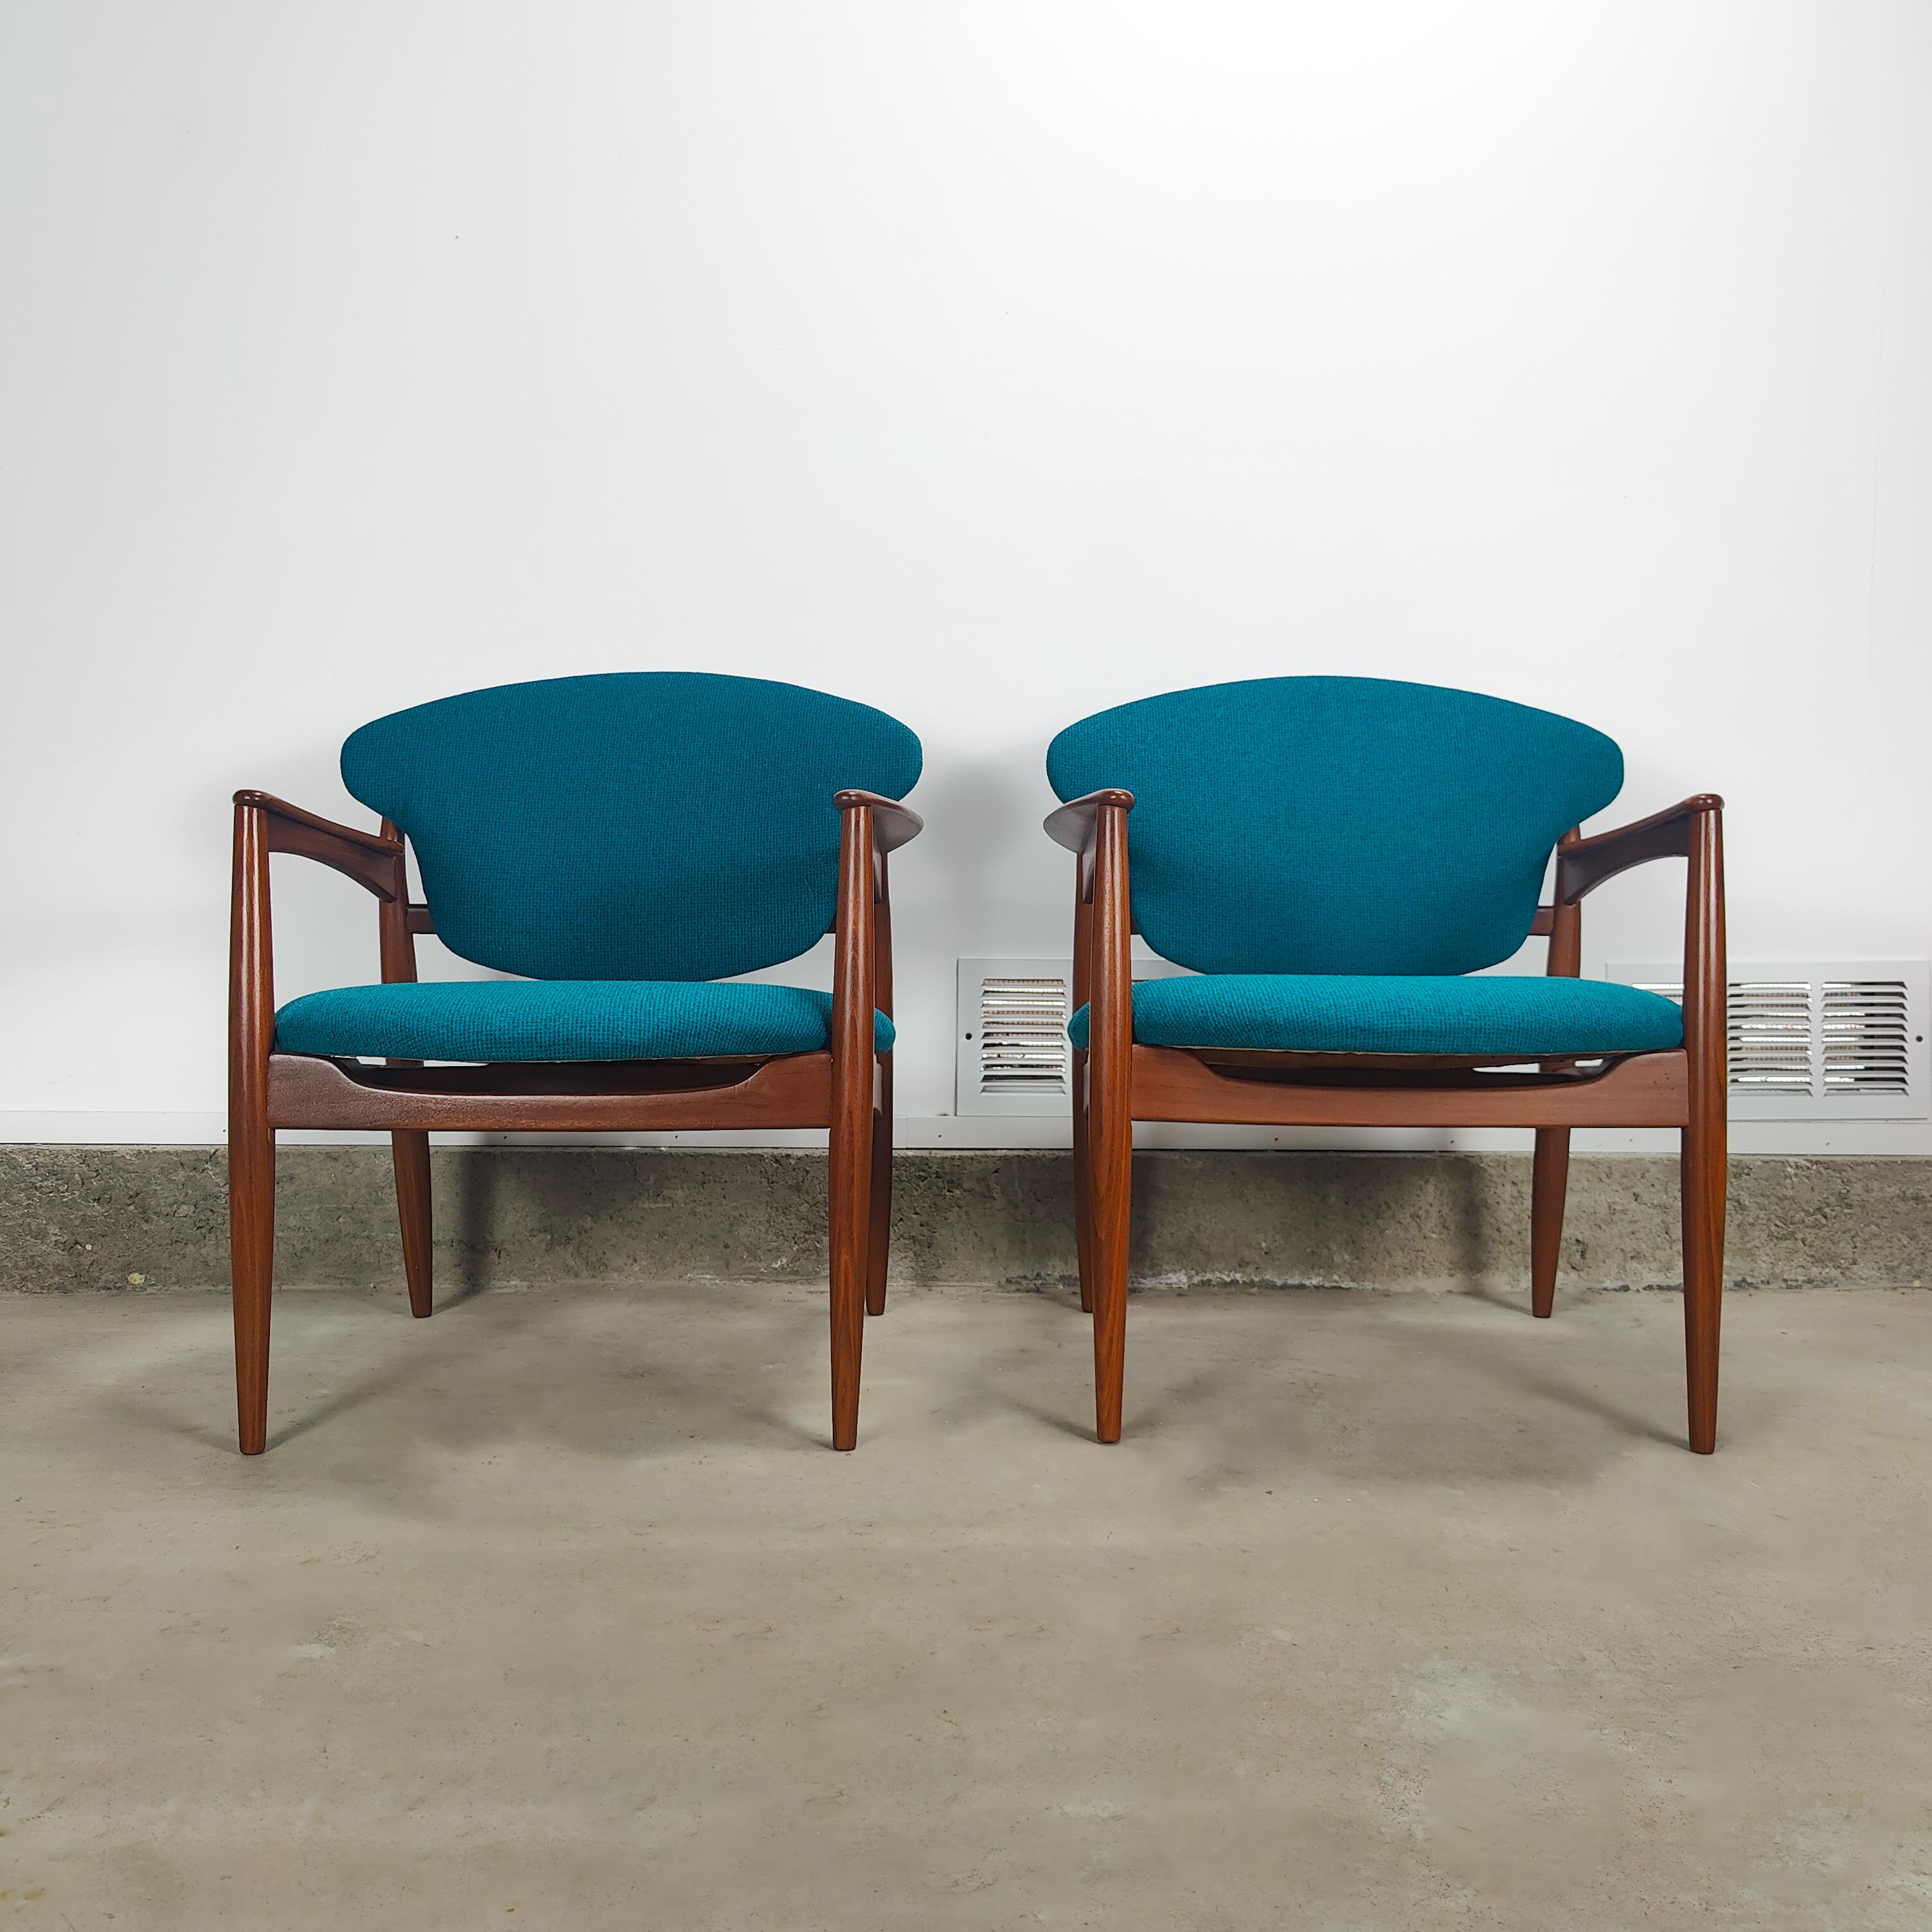 Vintage Midcentury Chairs by L.K. Hjelle Stol & Møbelfabrikk In Excellent Condition For Sale In Chino Hills, CA